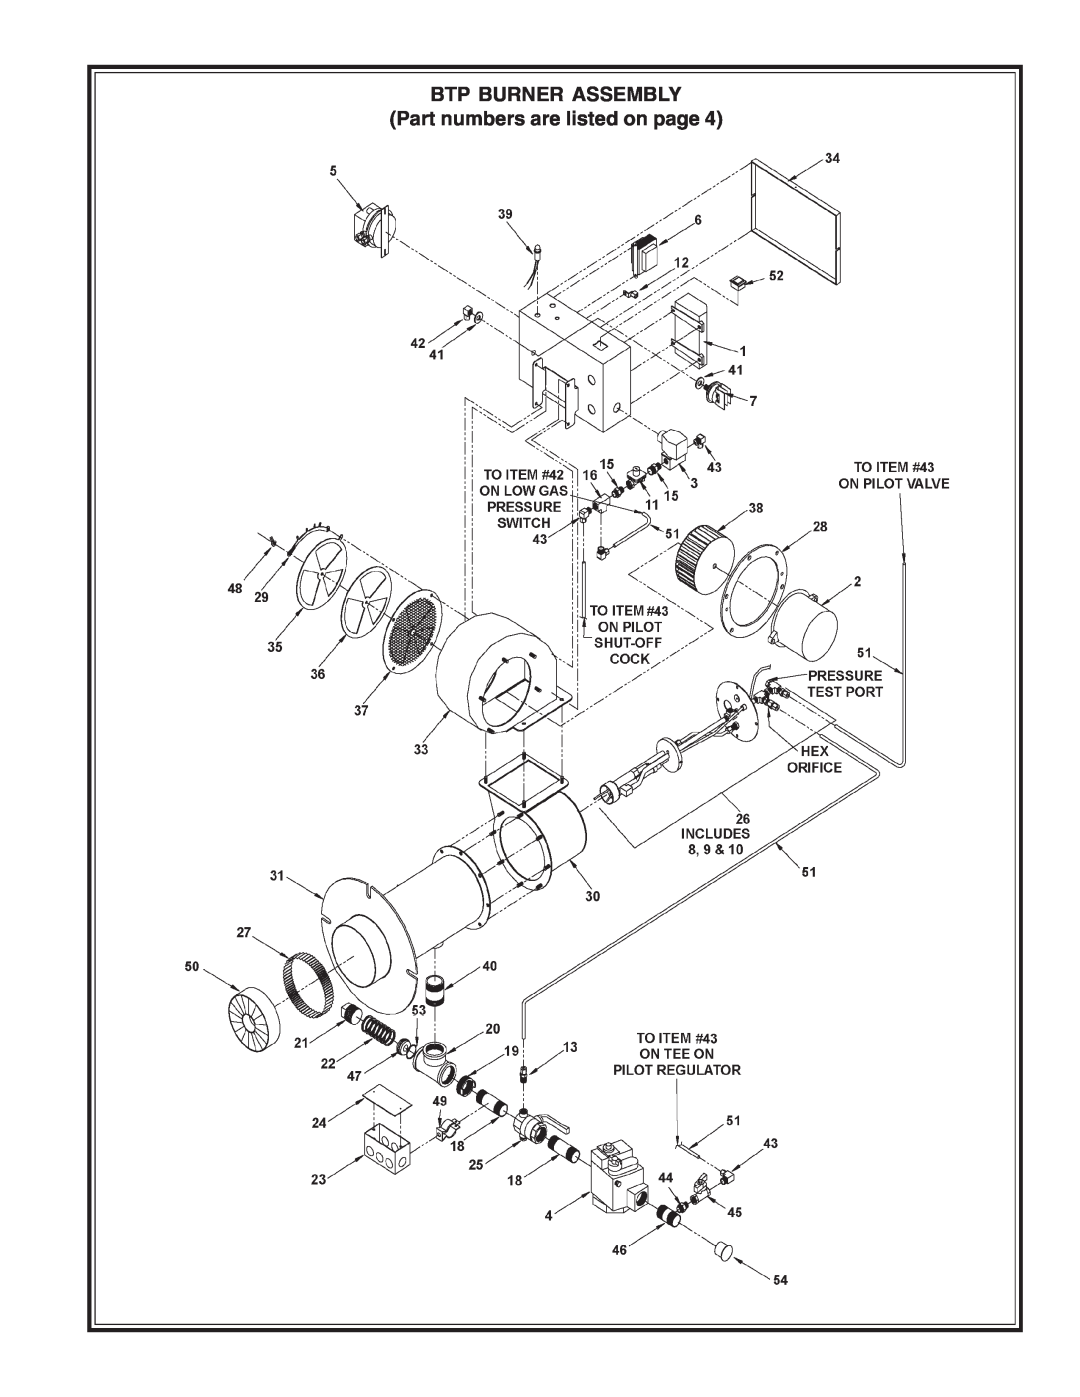 A.O. Smith 104 Series, BTP(V)-740A manual BTP BURNER ASSEMBLY Part numbers are listed on page 